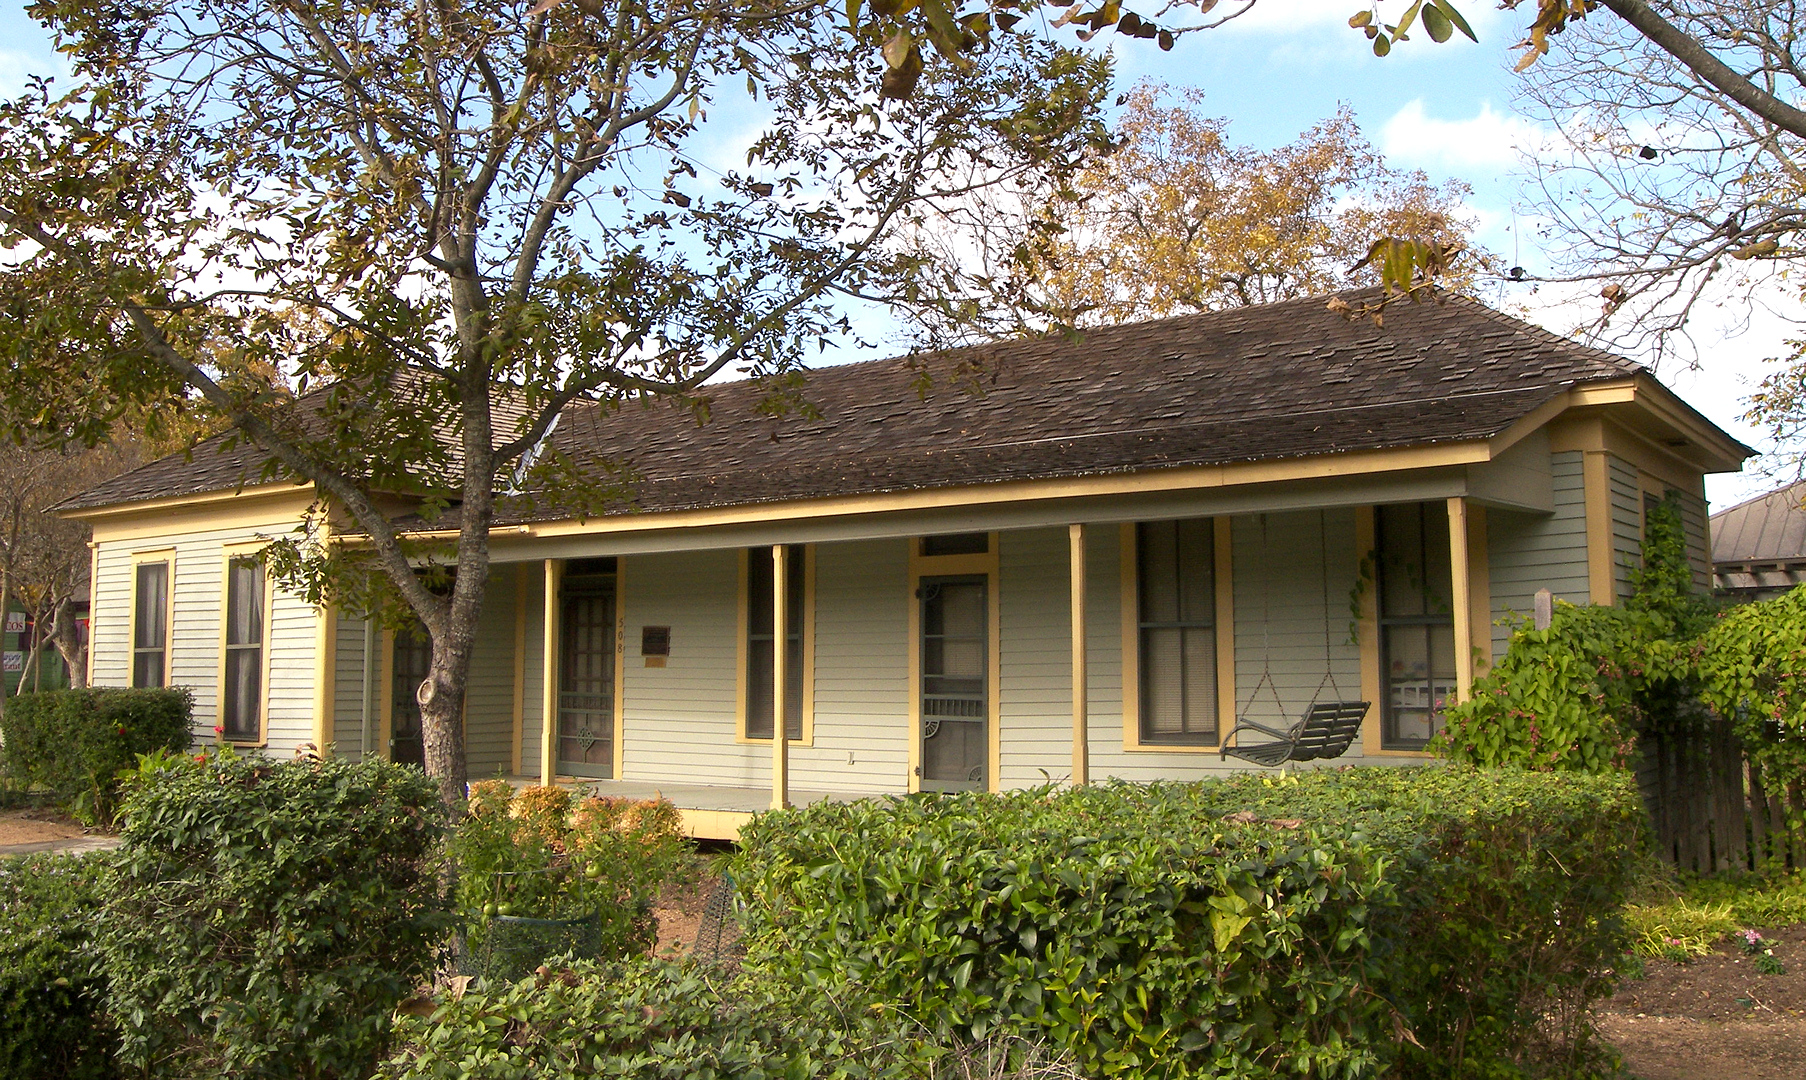 The Katherine Anne Porter house in 2009